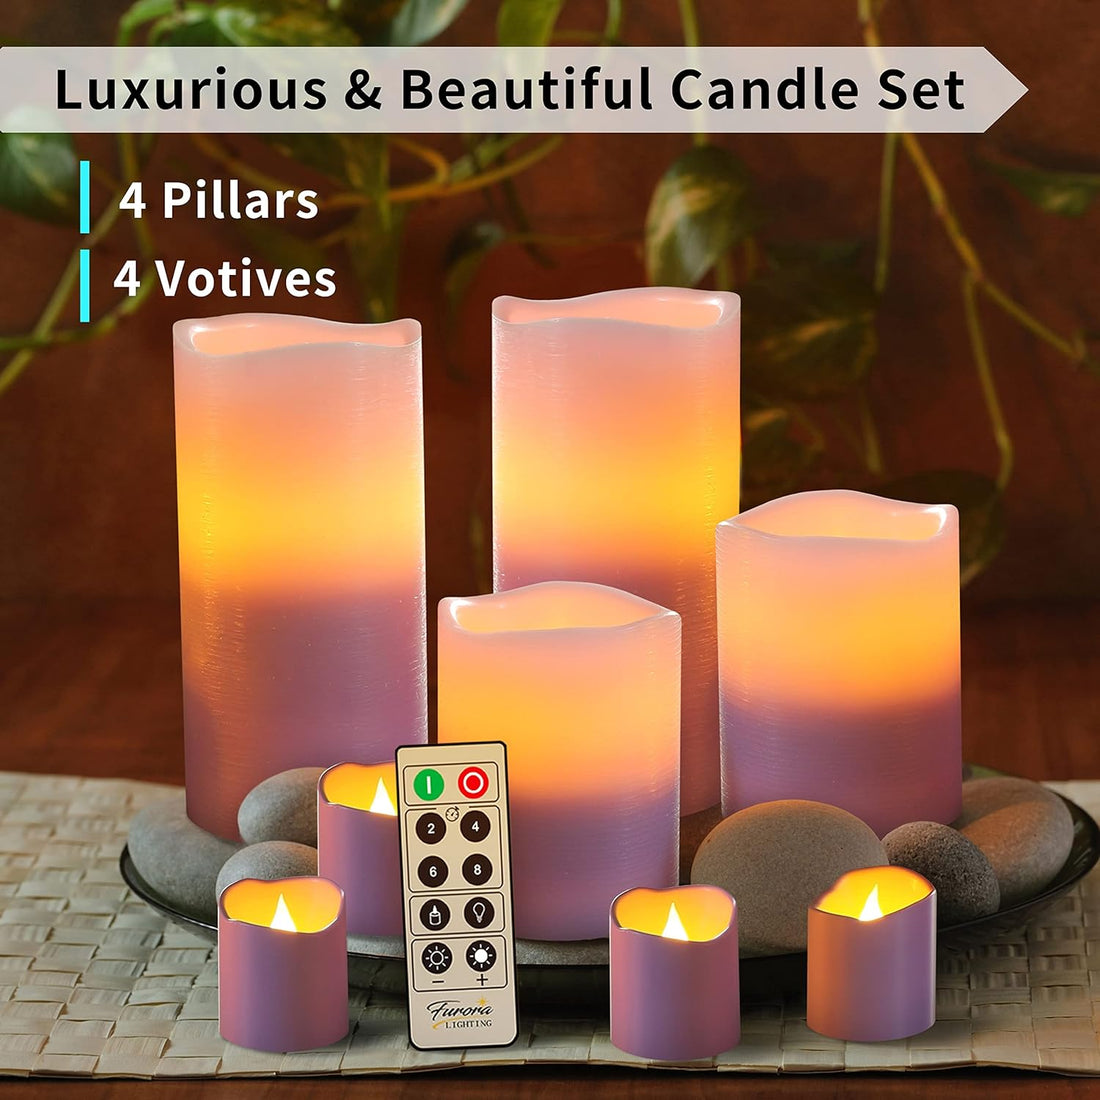 FURORA LIGHTING Lavender Purple Flameless LED Candles with Remote, Set of 8, Pillar Candles & Votive Candles Battery Operated, Gift Set for Home Decor, Decorative Candles, Candles with Timer